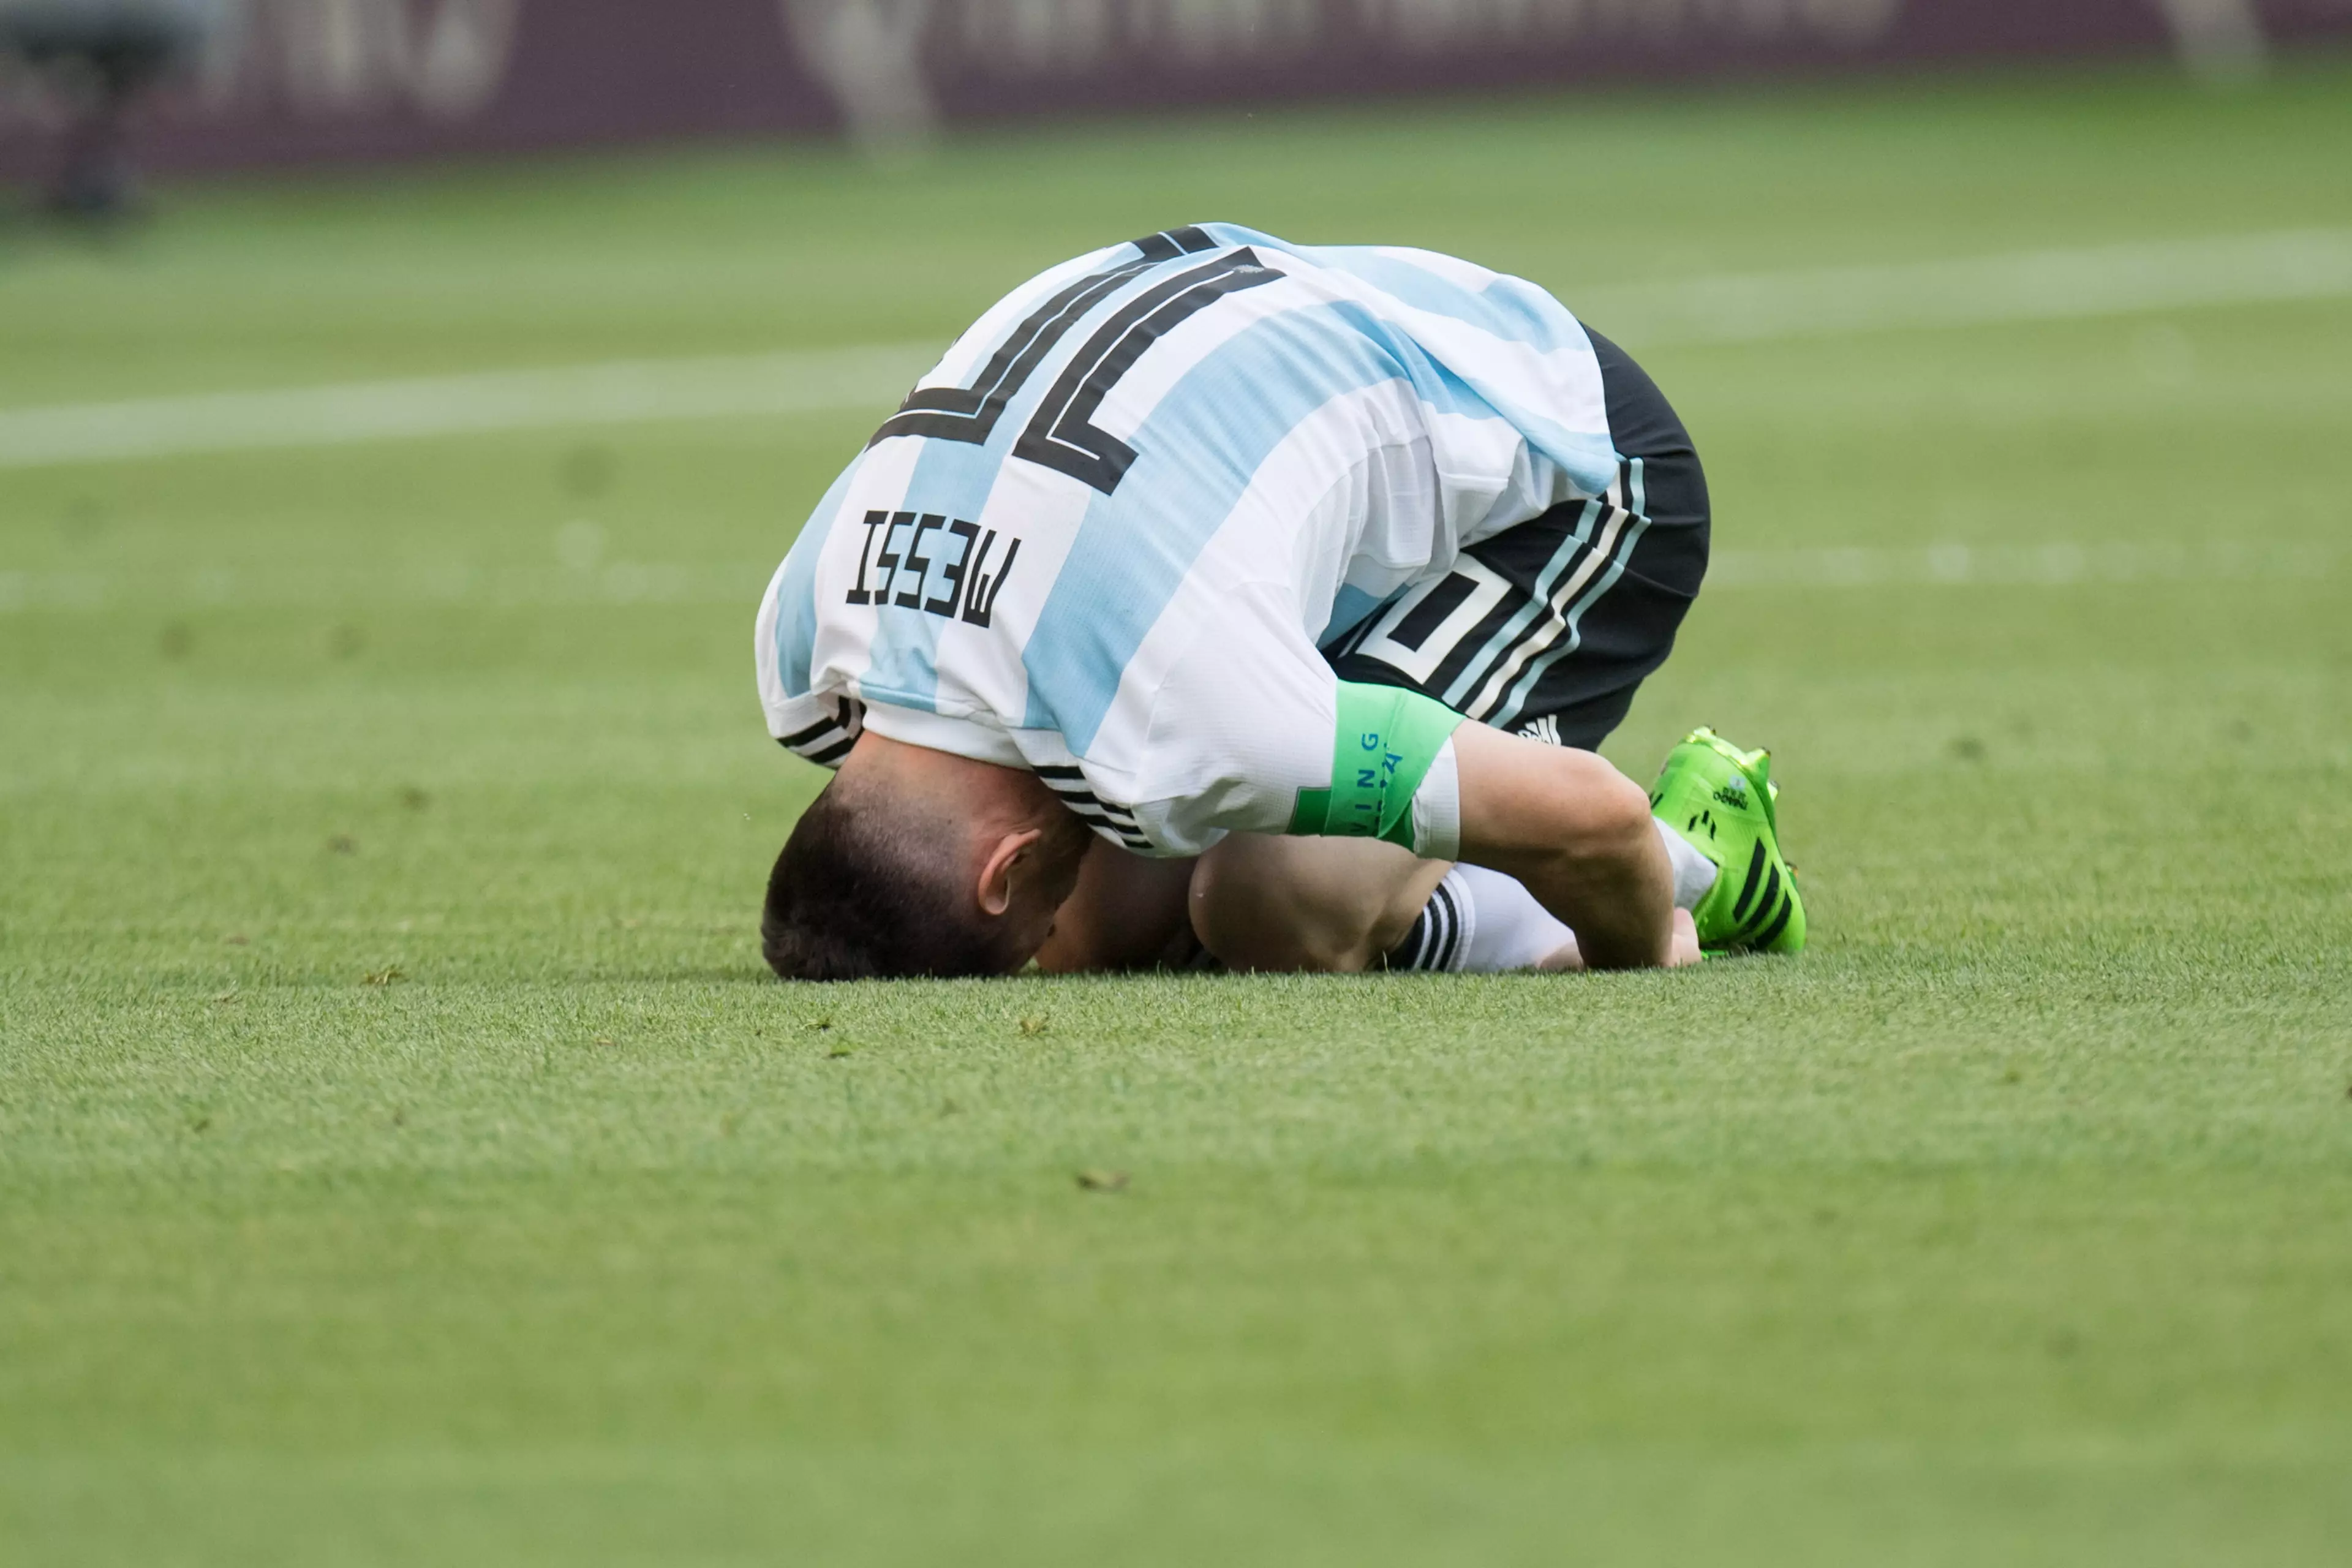 Video Of The Worst Tackles On Lionel Messi Surfaces And Proves He’s Superhuman